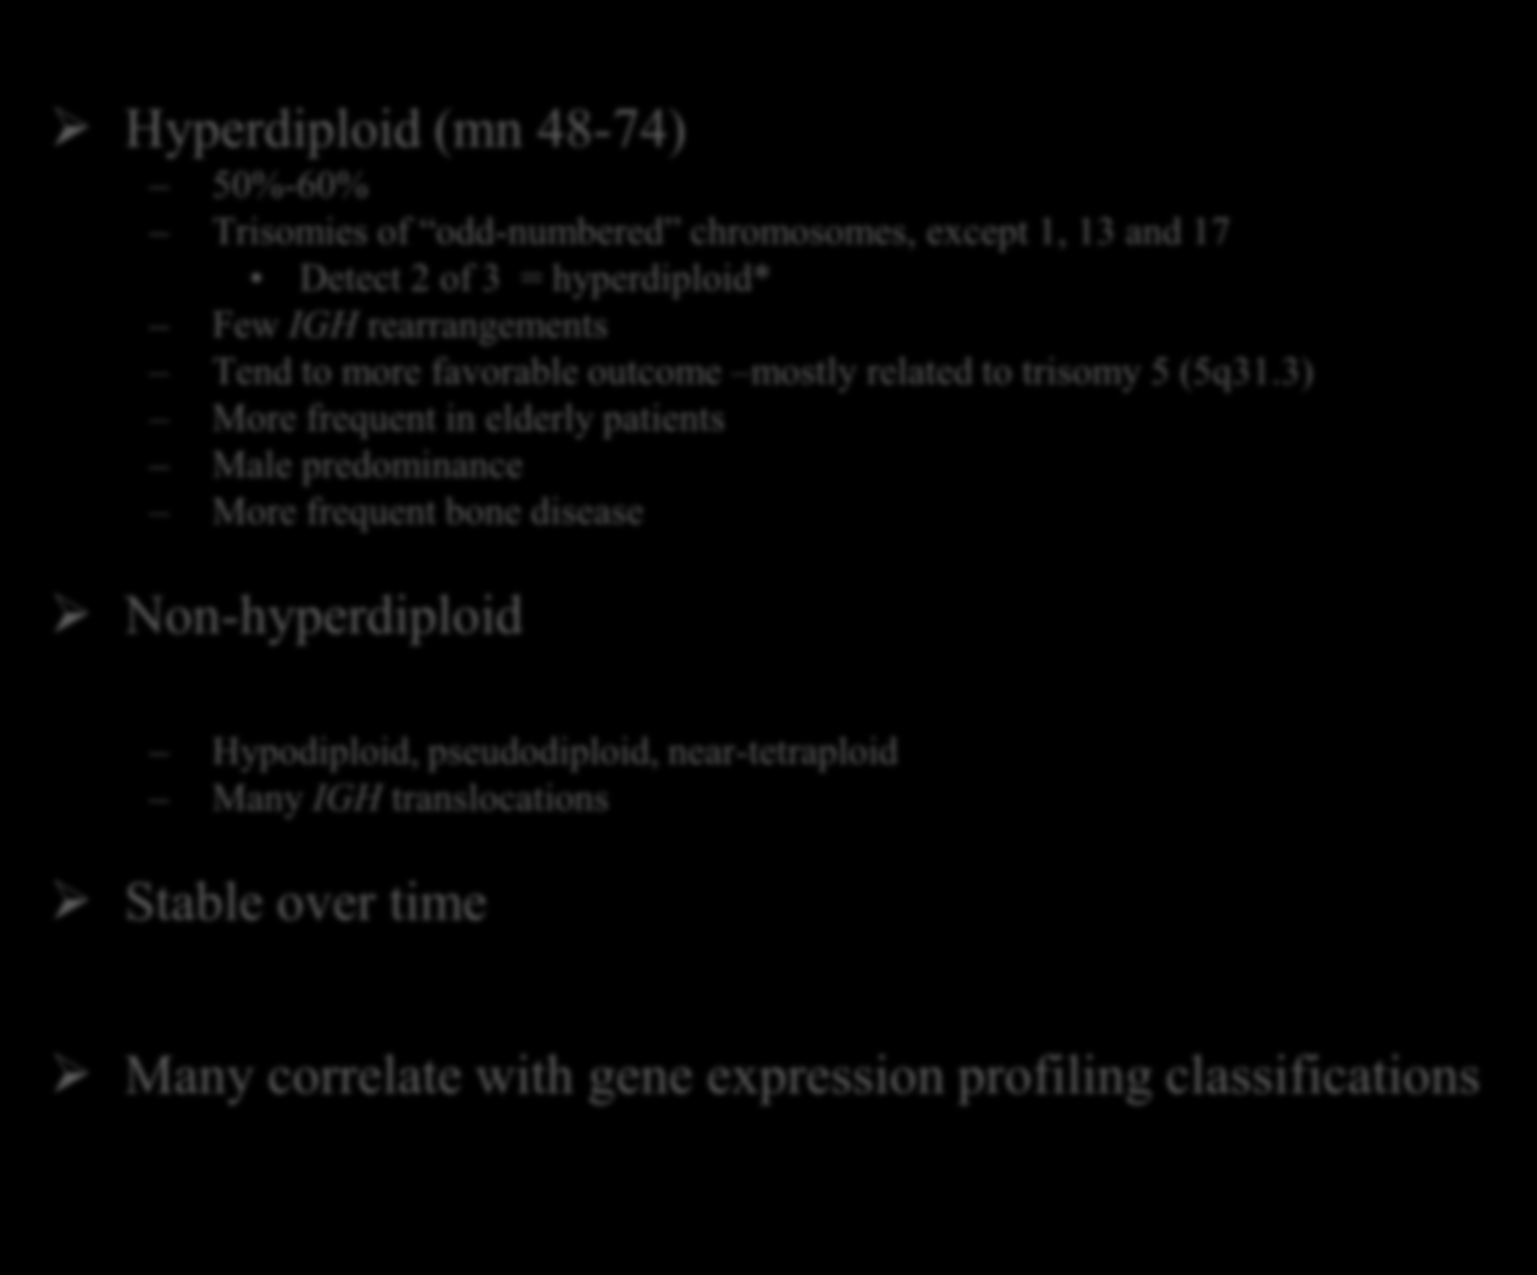 MM, Classification génétique Hyperdiploid (mn 48-74) 50%-60% Trisomies of odd-numbered chromosomes, except 1, 13 and 17 Detect 2 of 3 = hyperdiploid* Few IGH rearrangements Tend to more favorable